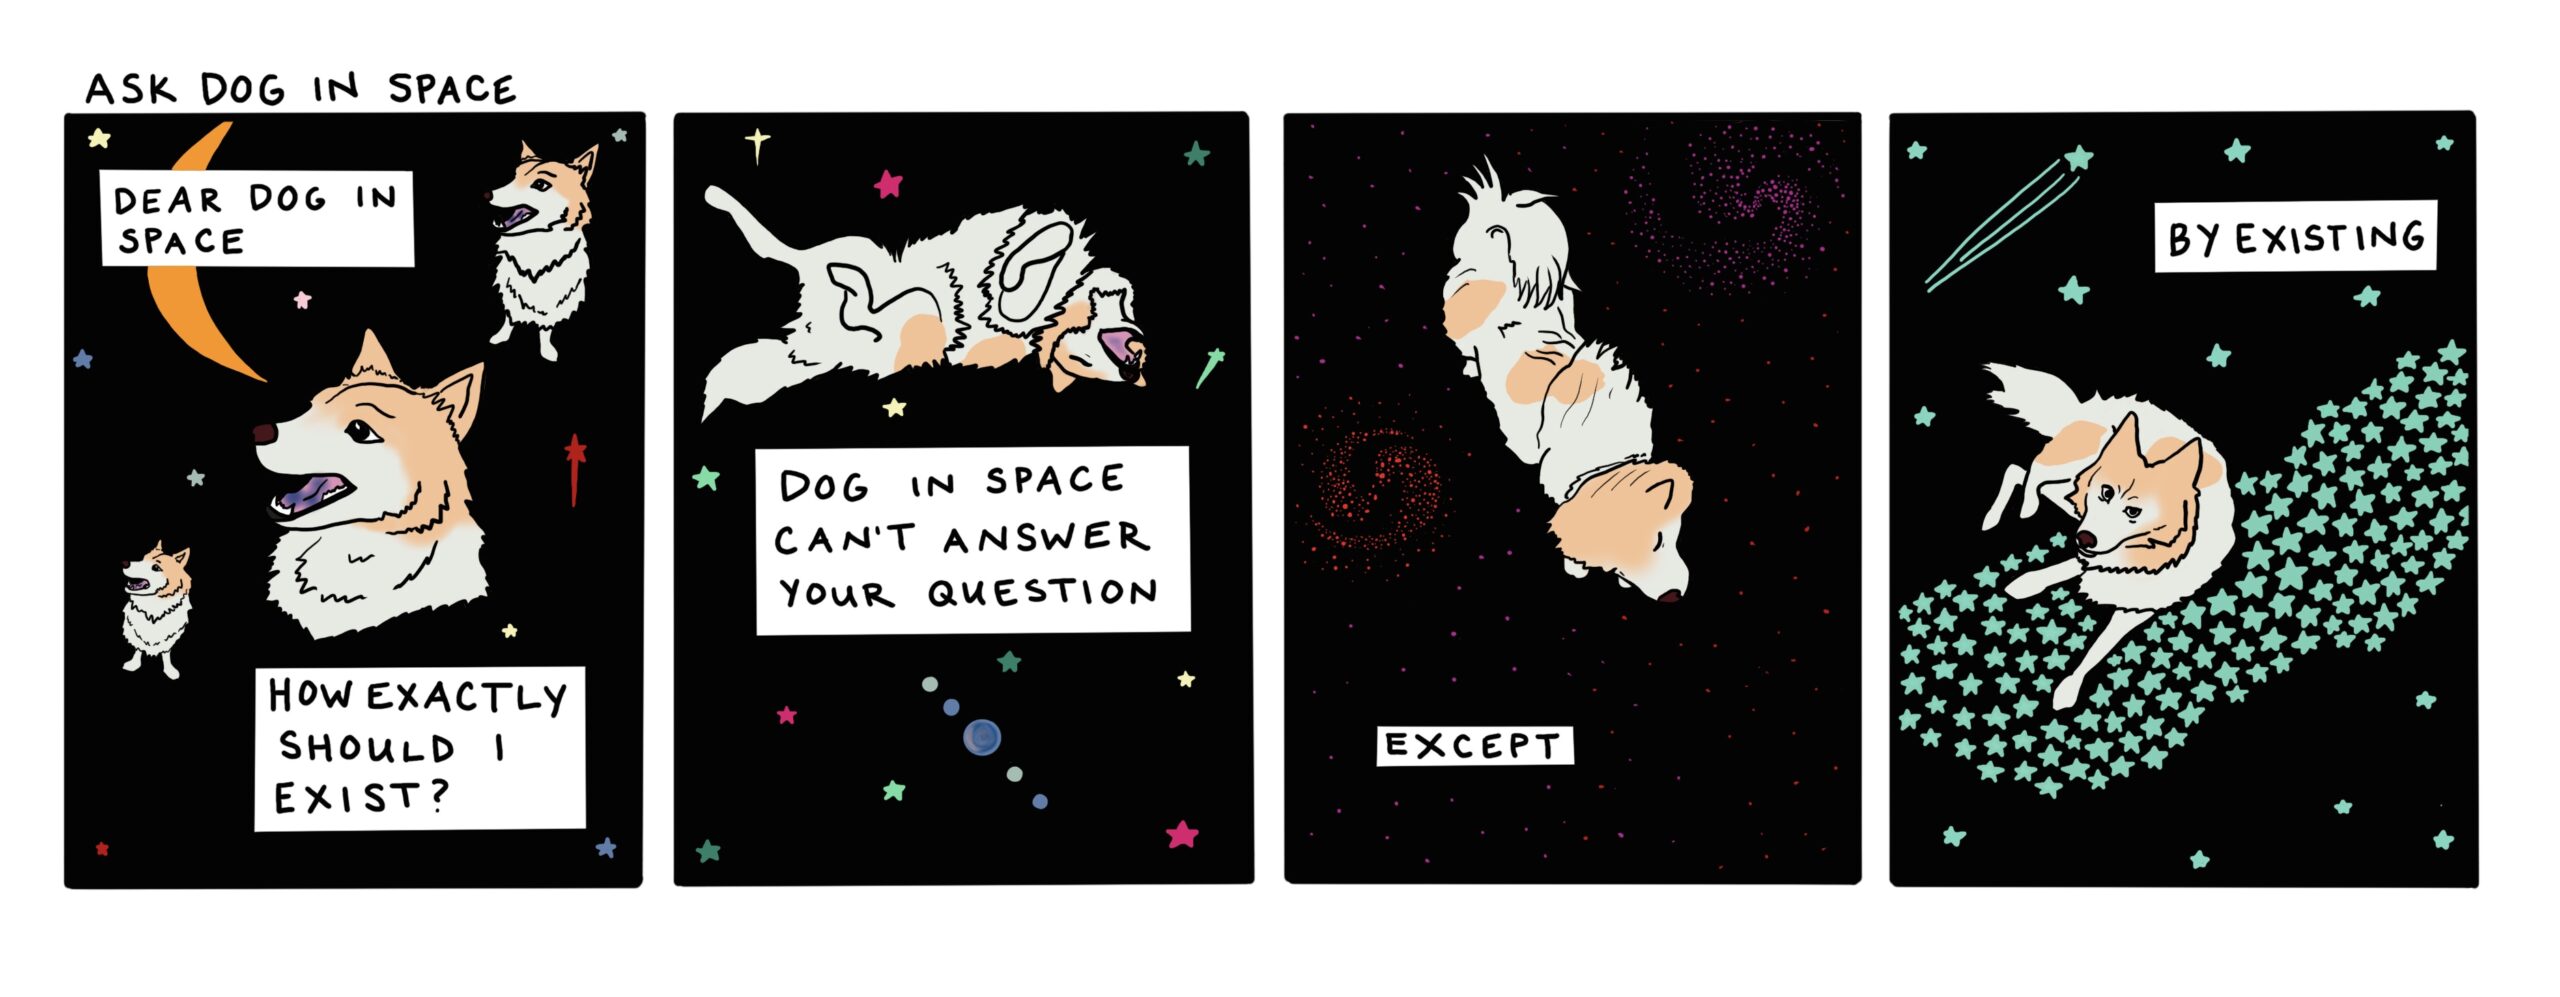 a white fluffy dog plays among the stars